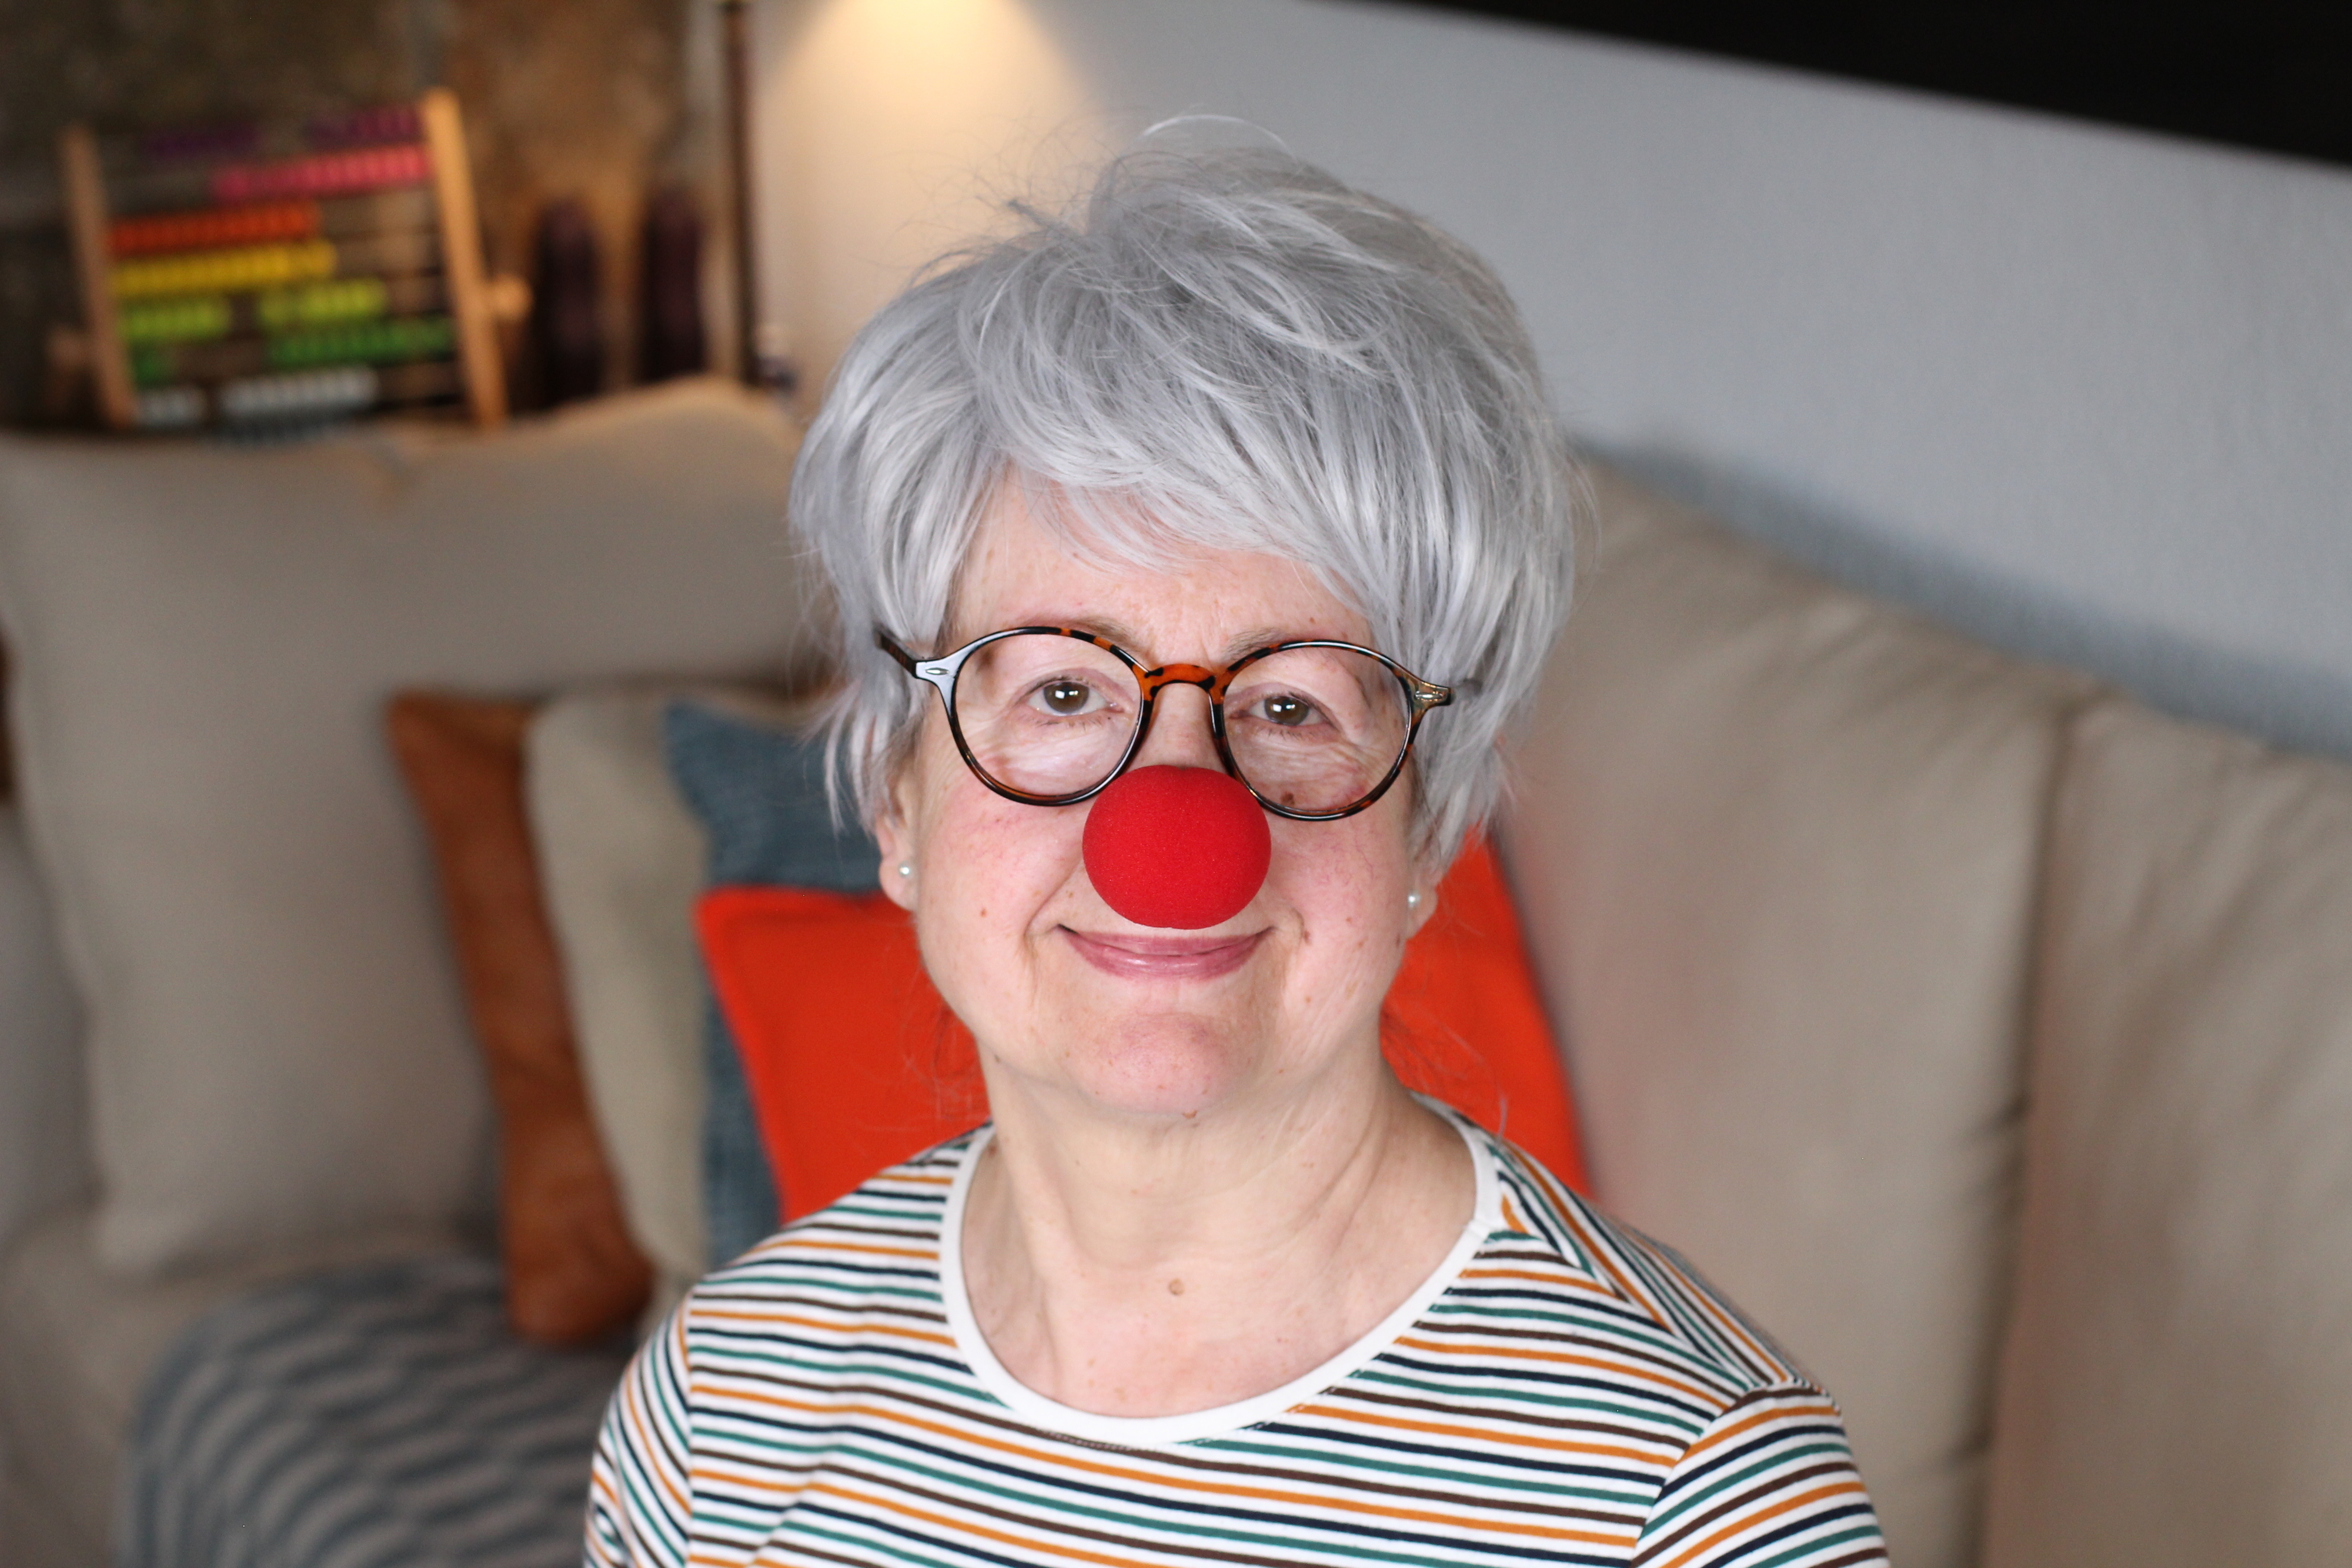 Woman with a red clown nose, glasses, and a striped shirt smiles at the camera